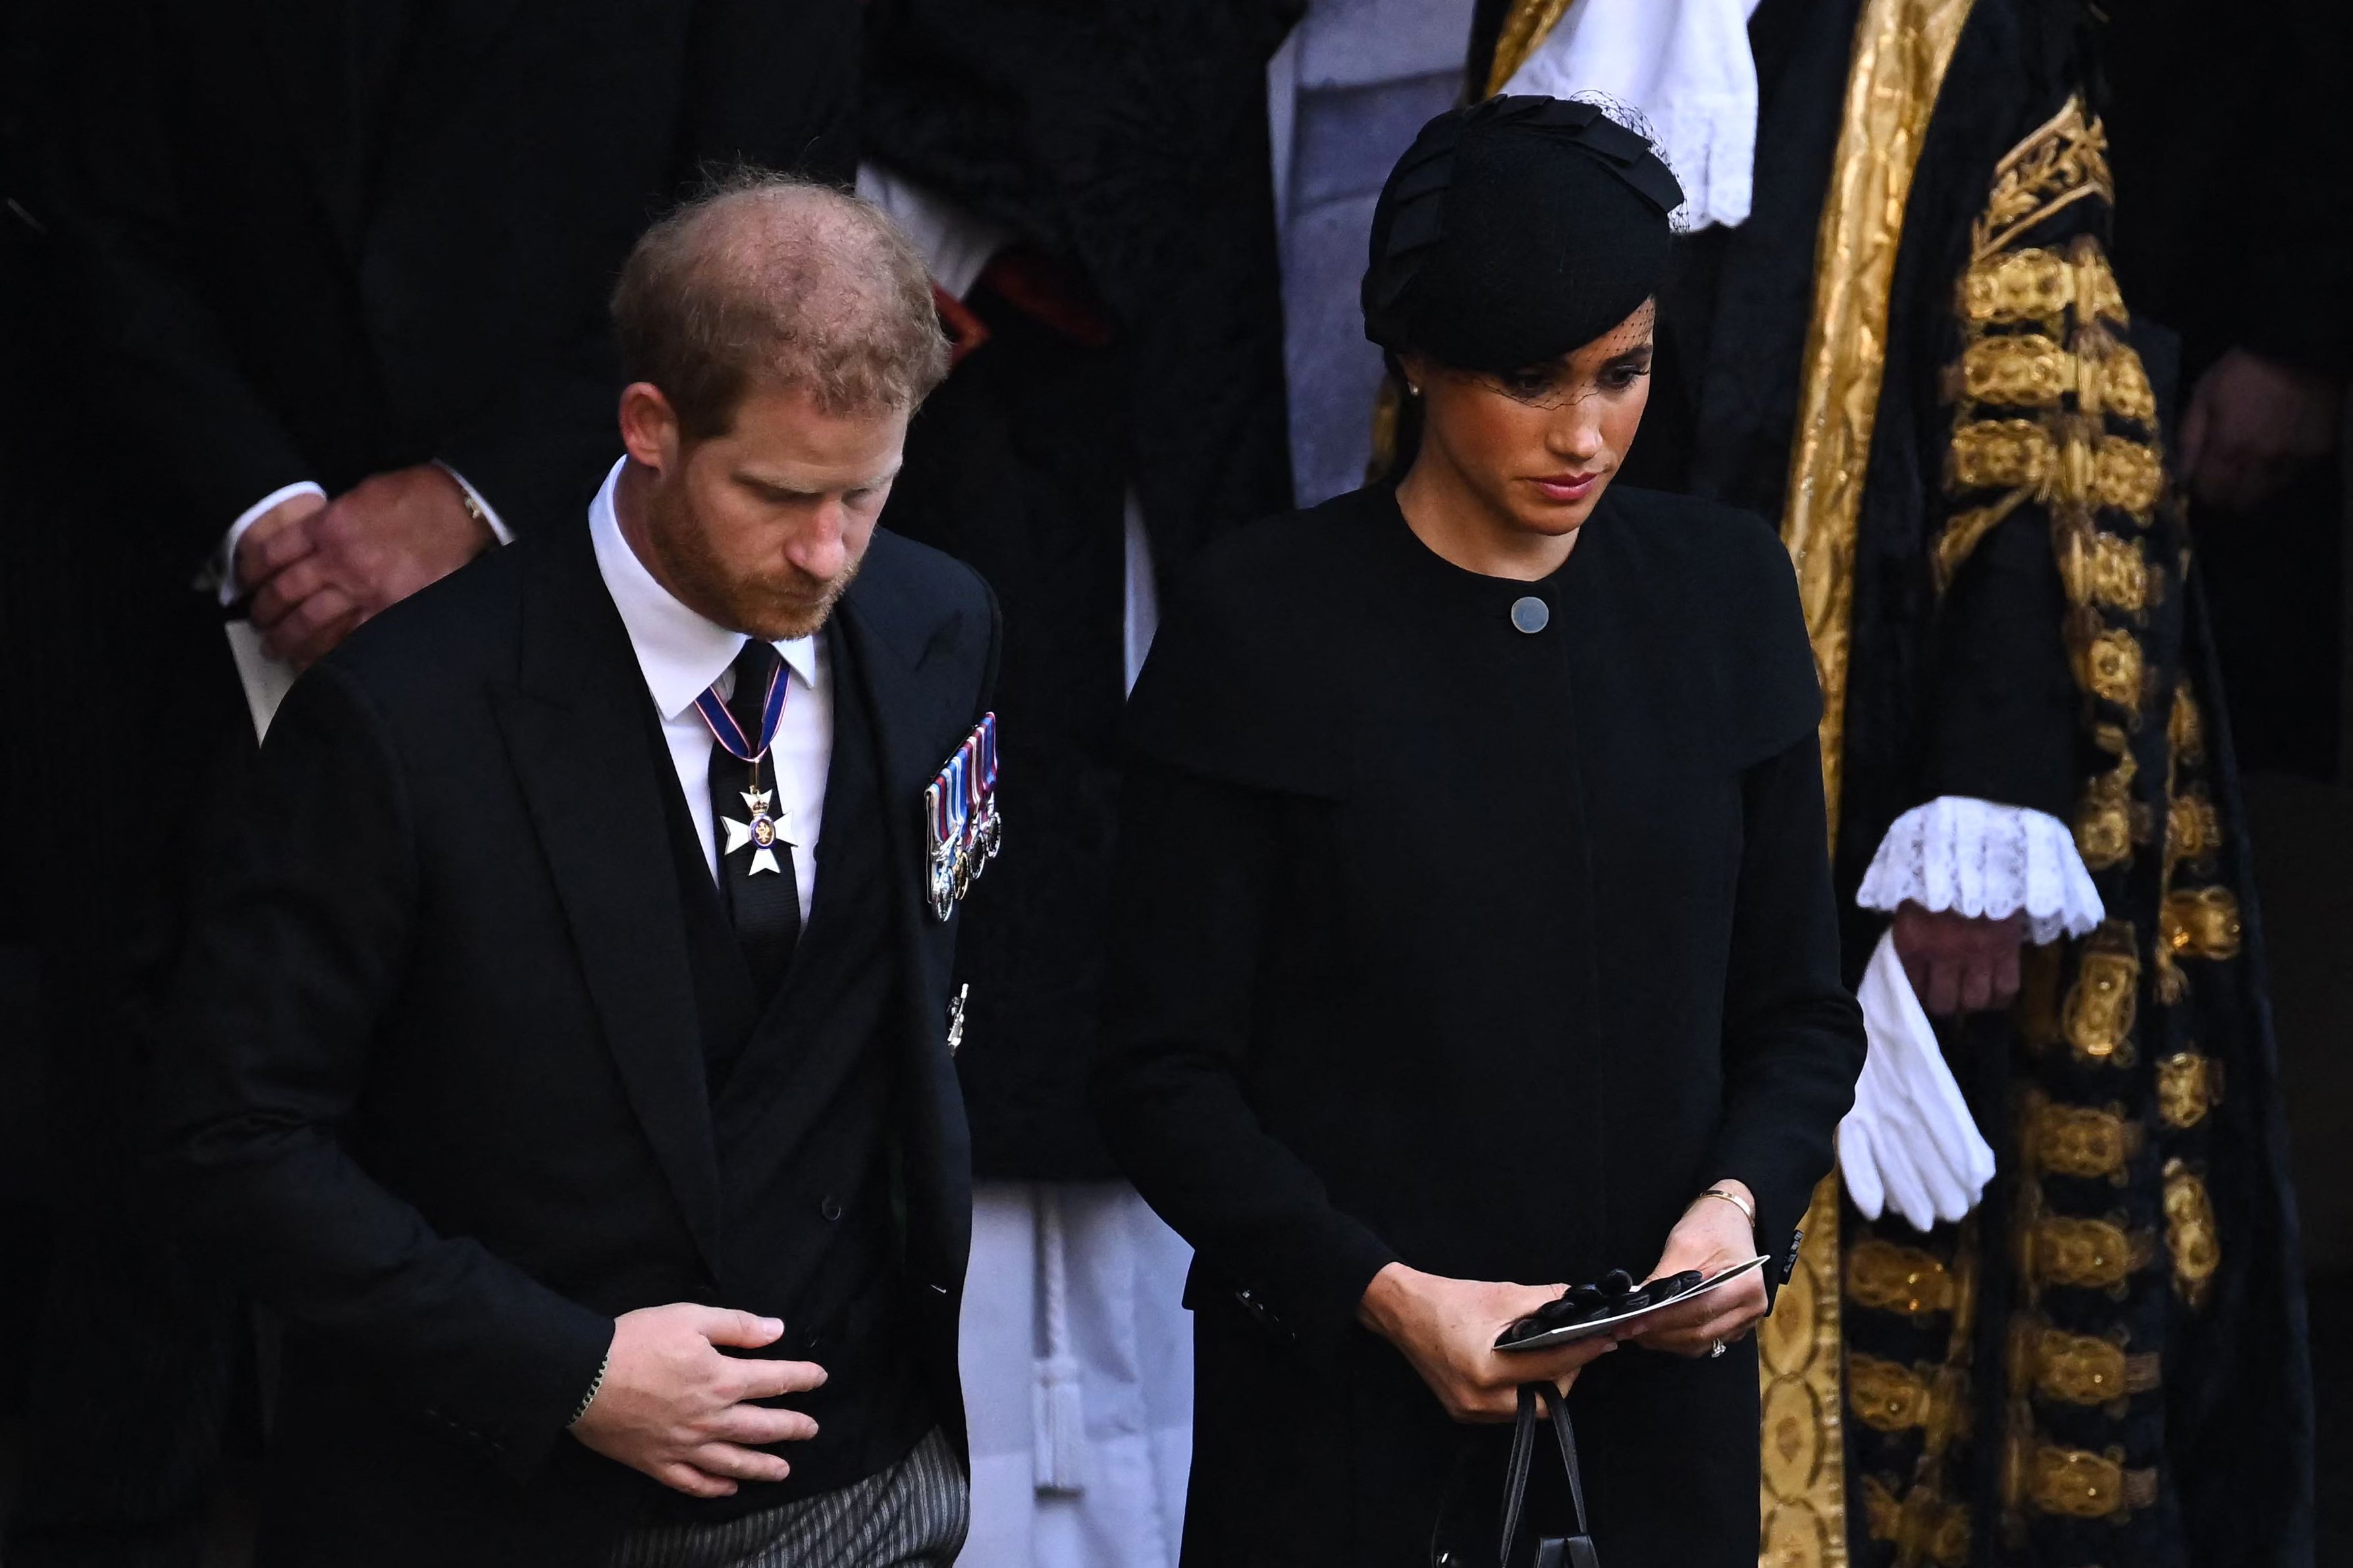 Prince Harry, Duke of Sussex and Meghan, Duchess of Sussex leave after a service for Queen Elizabeth II's coffin reception in Westminster Hall, at the Palace of Westminster in London on September 14, 2022 |  Source: Getty Images 